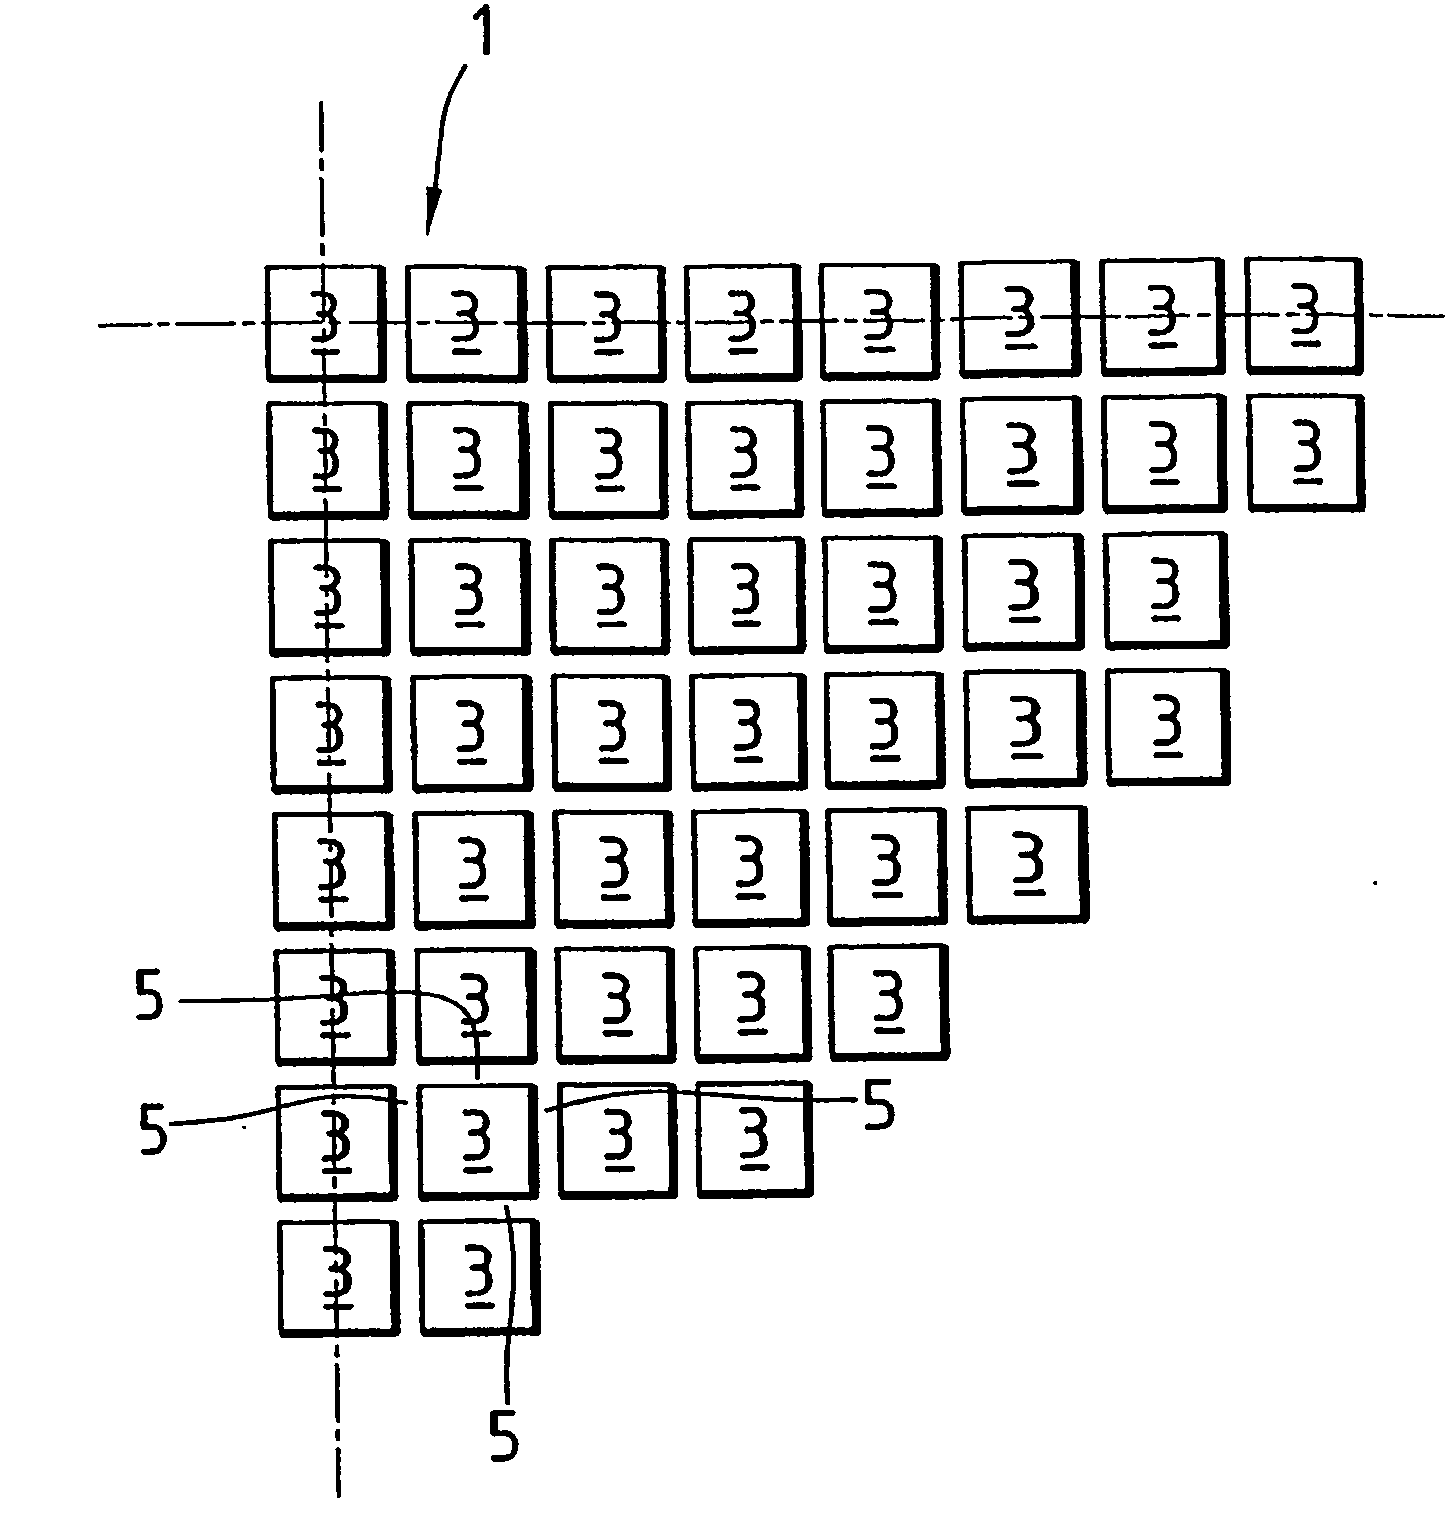 Fuel Assembly For A Pressurized Water Nuclear Reactor Containing Plutonium-Free Enriched Uranium